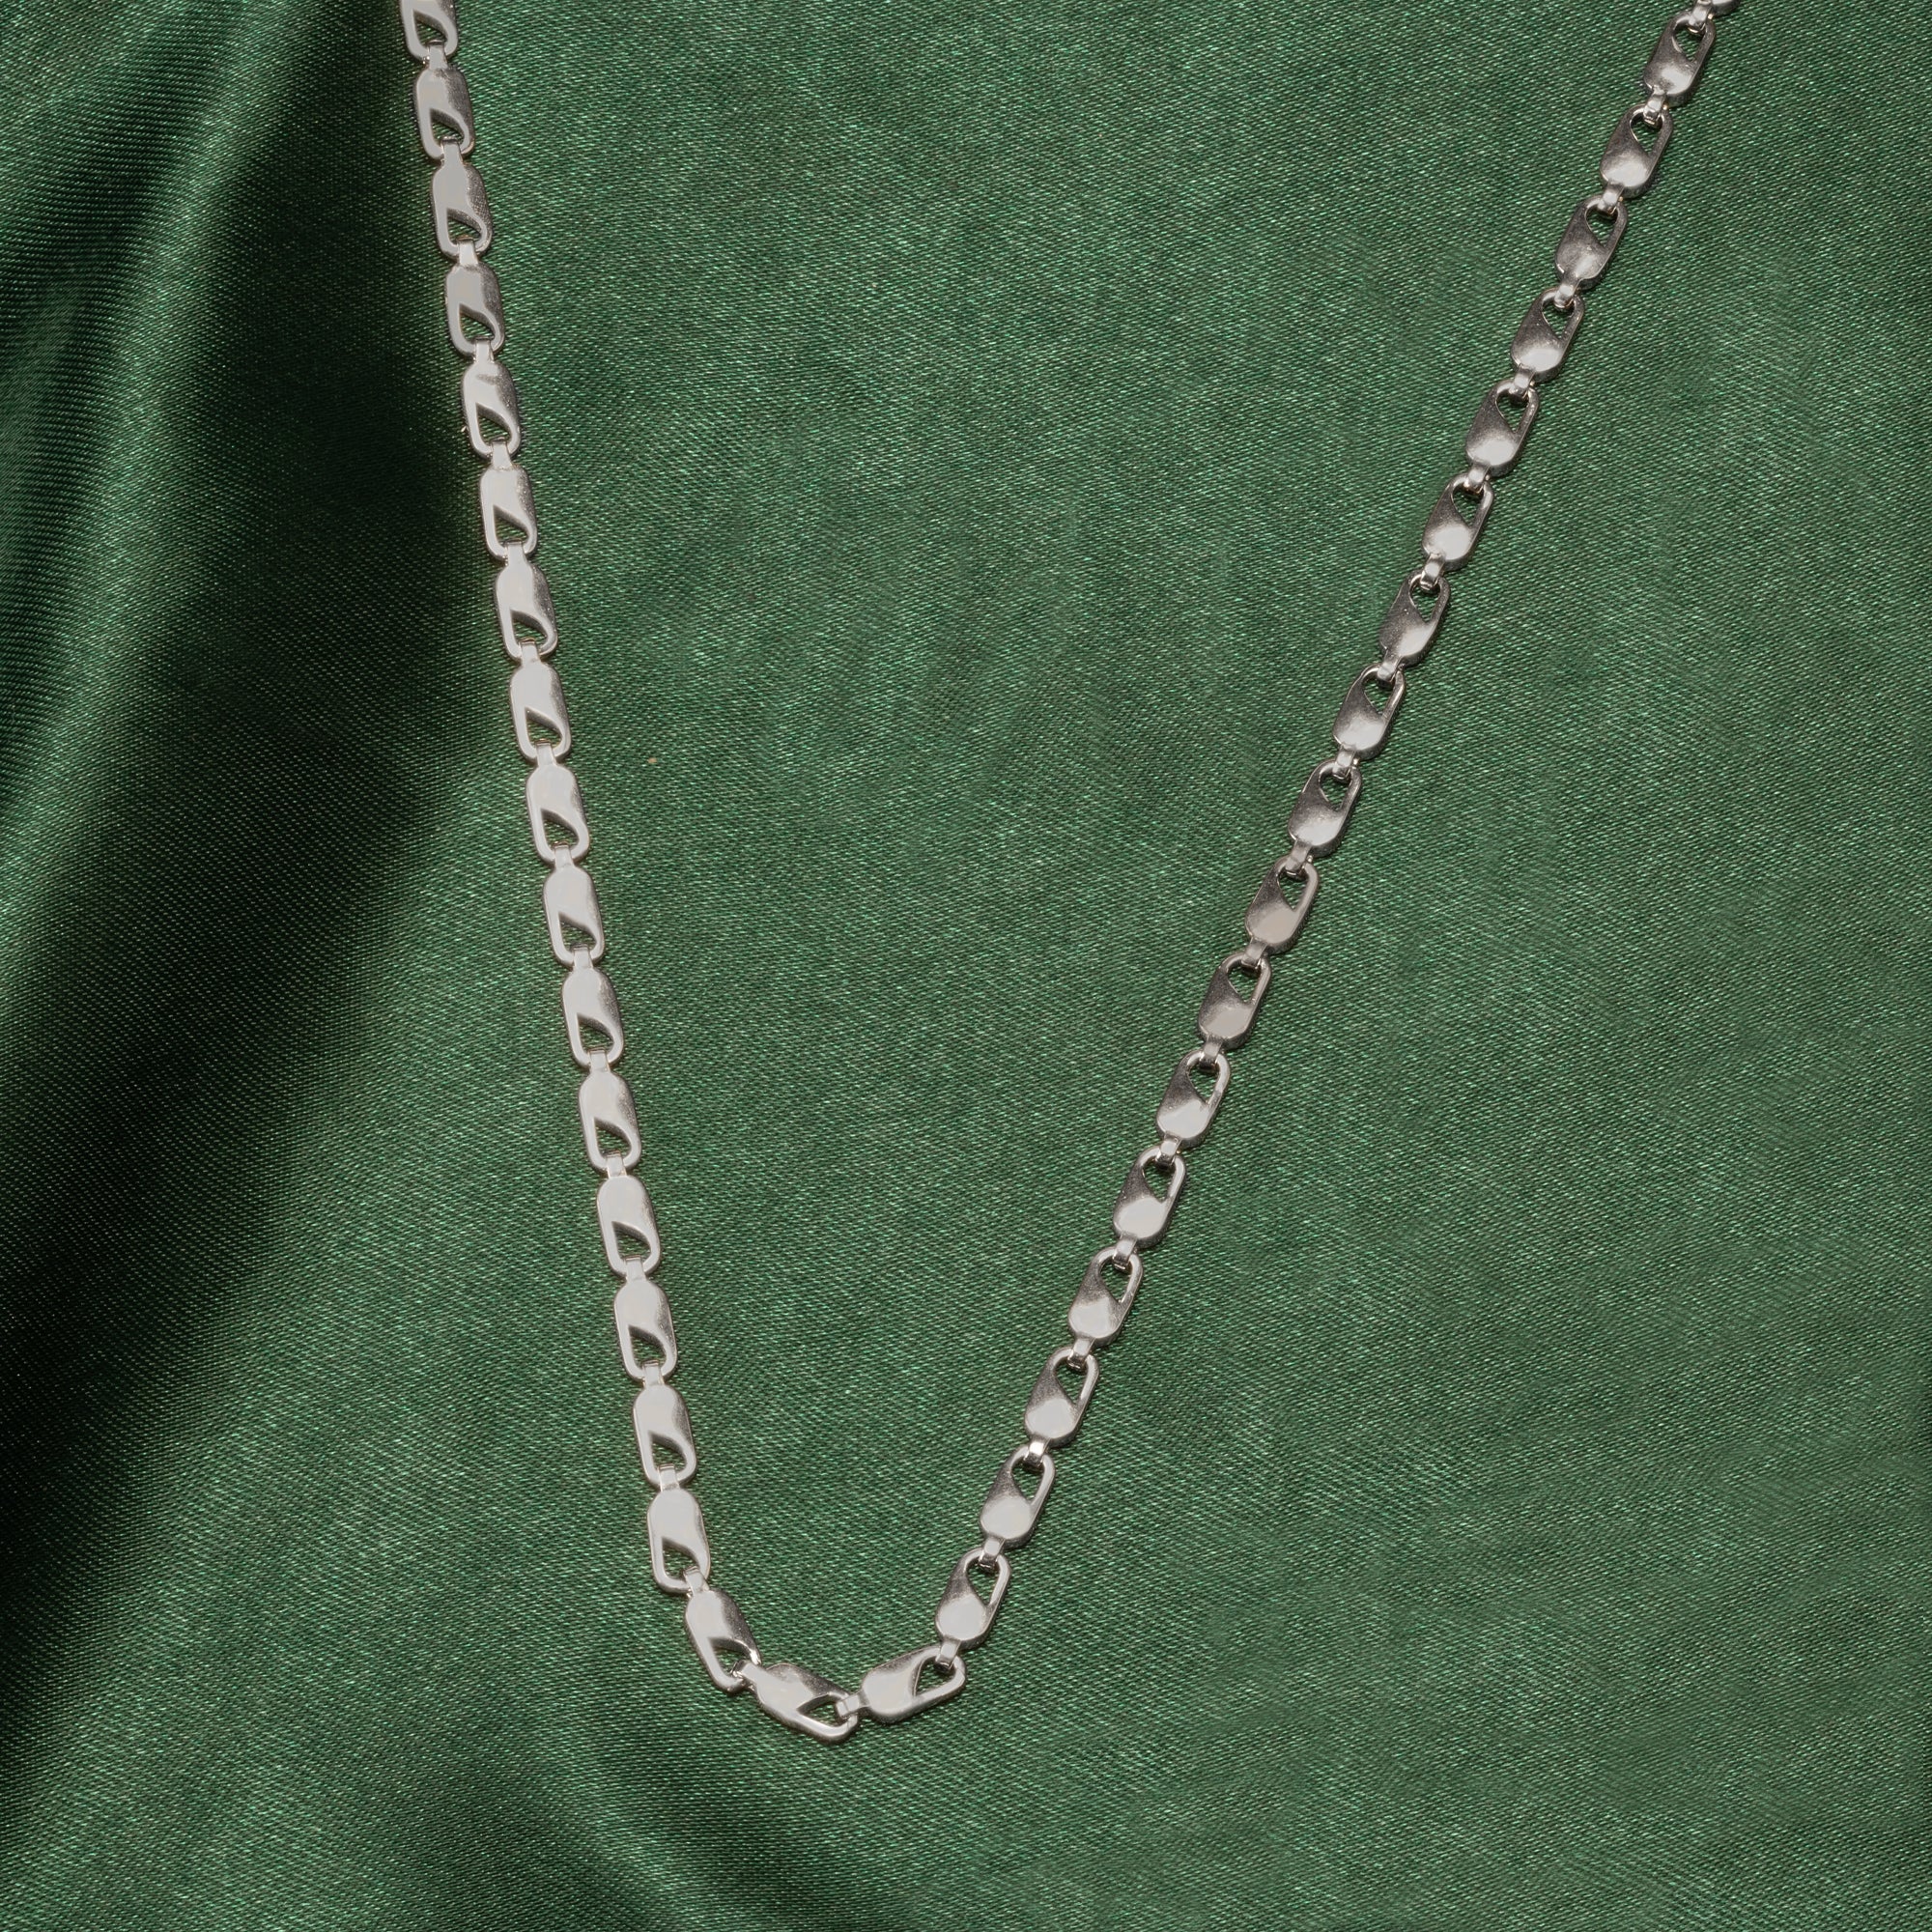 LOBSTER TAIL NECK CHAIN | SKU: 0018674941